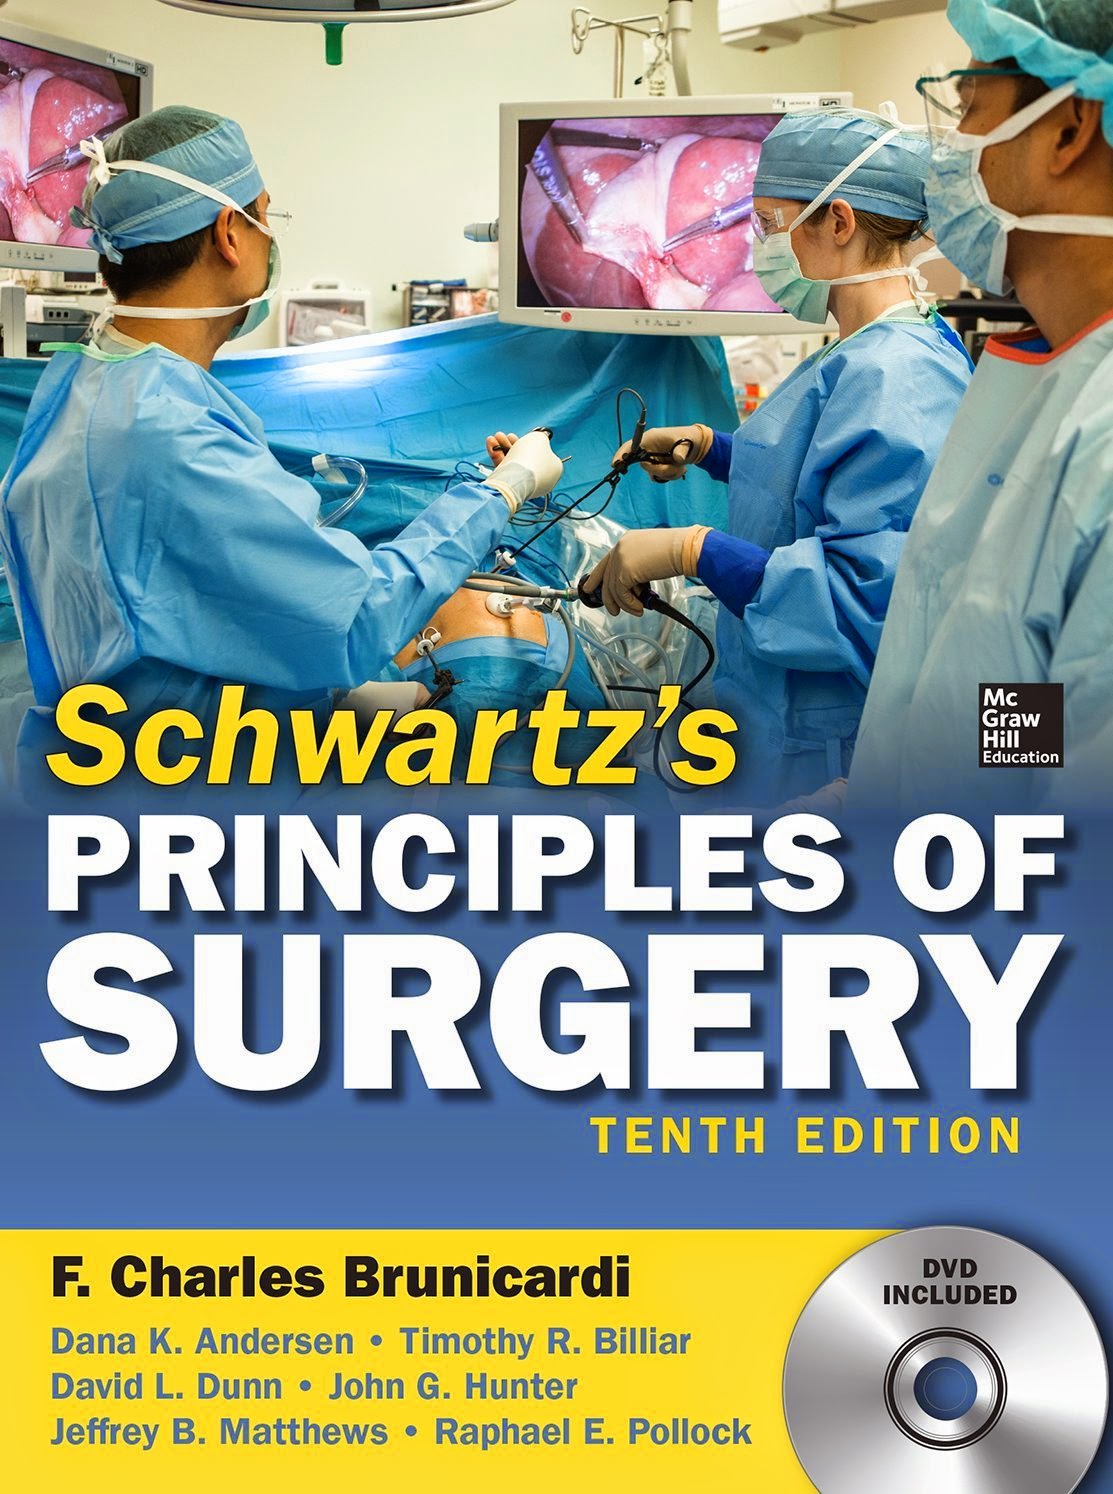 surgery review illustrated pdf free download